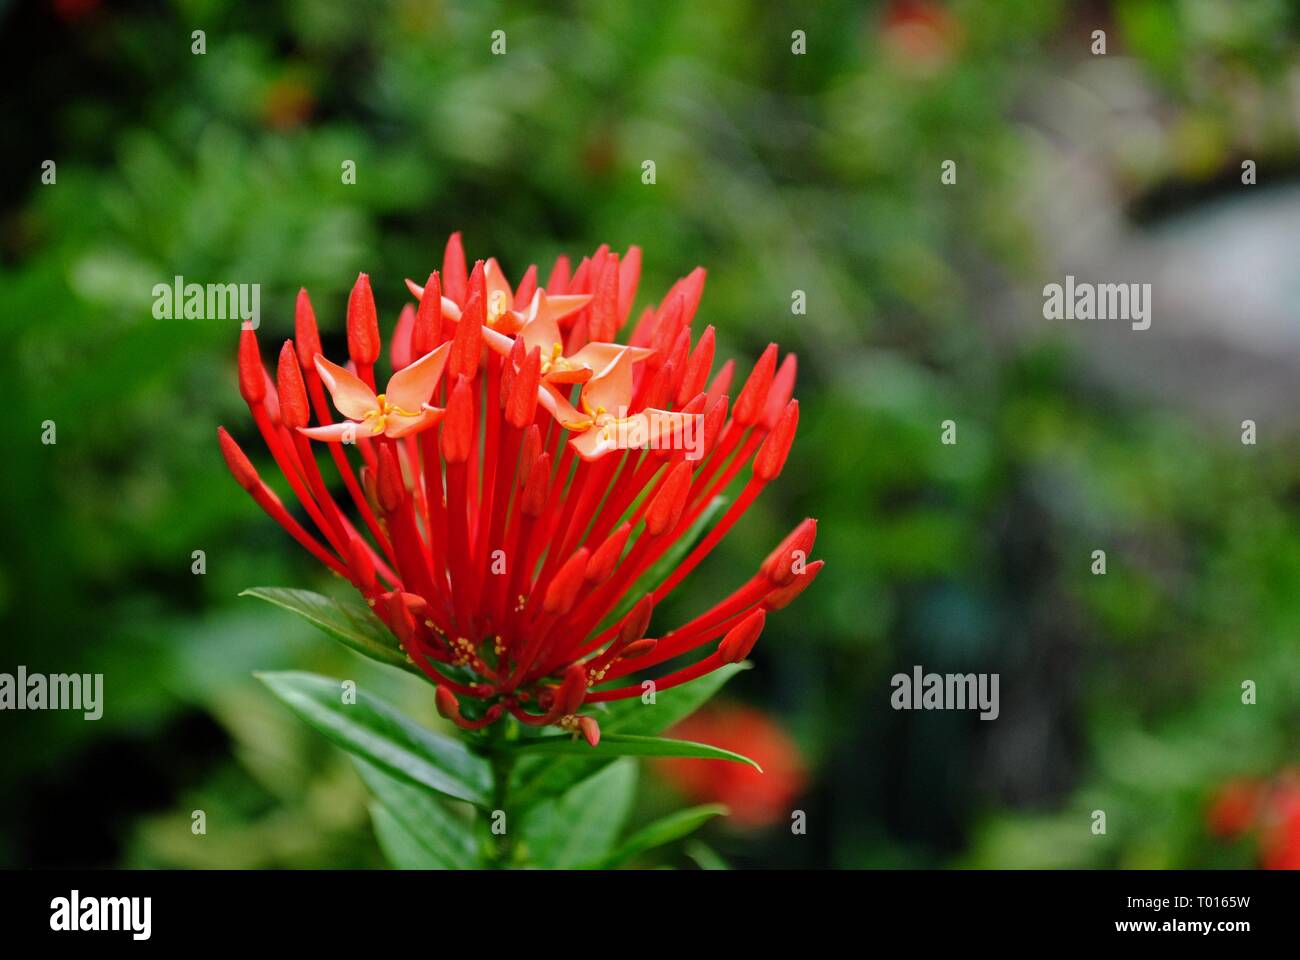 A clump of red santan flowers with blurred leaves in the background lxora Coccinea, or popularly known as santan flowers Stock Photo